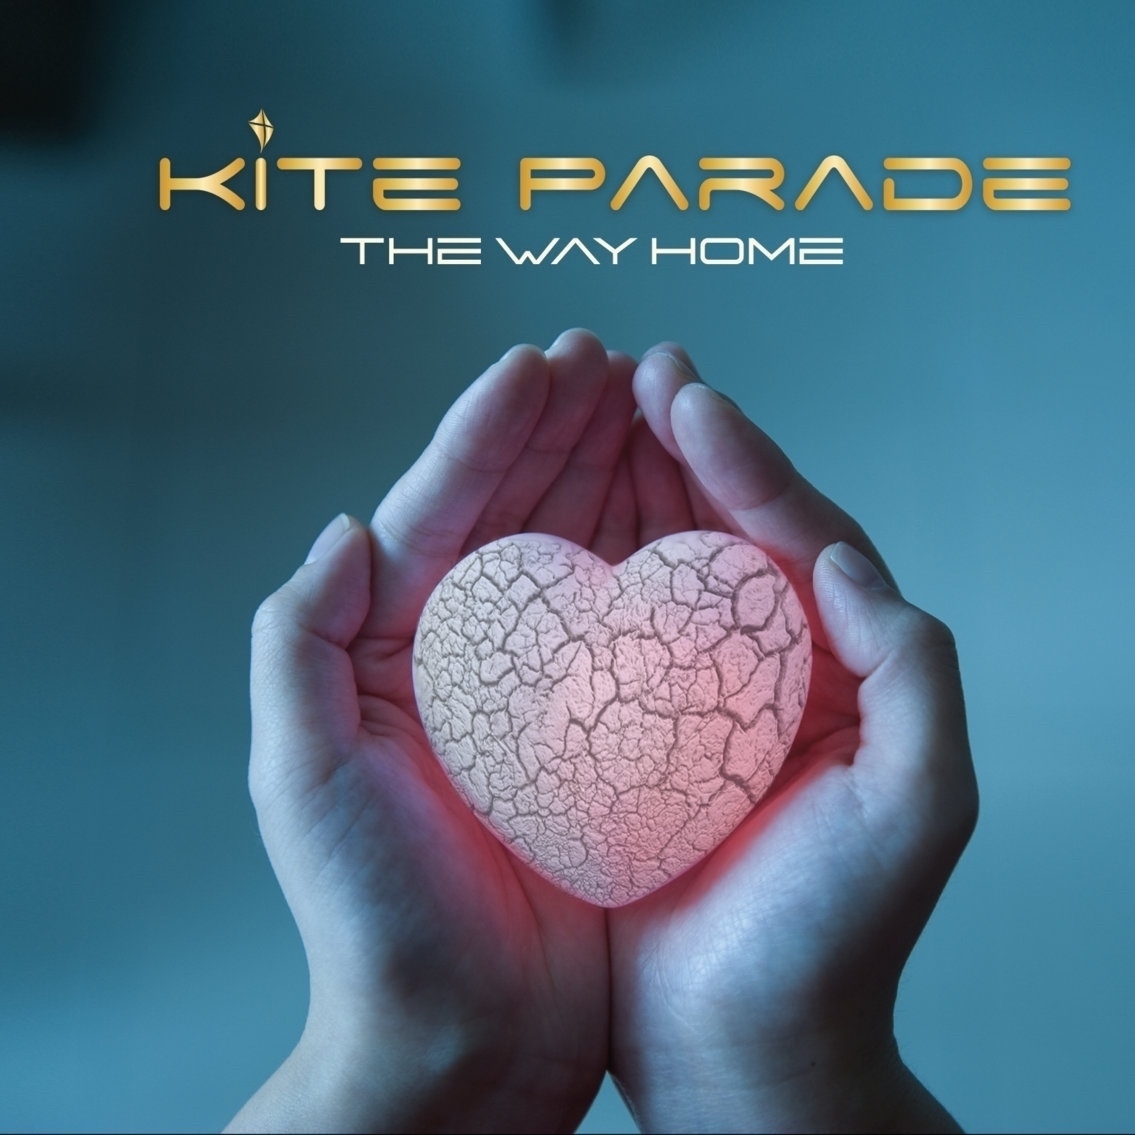 Album cover. Hands holding a glowing pink heart with a dried and cracked surface